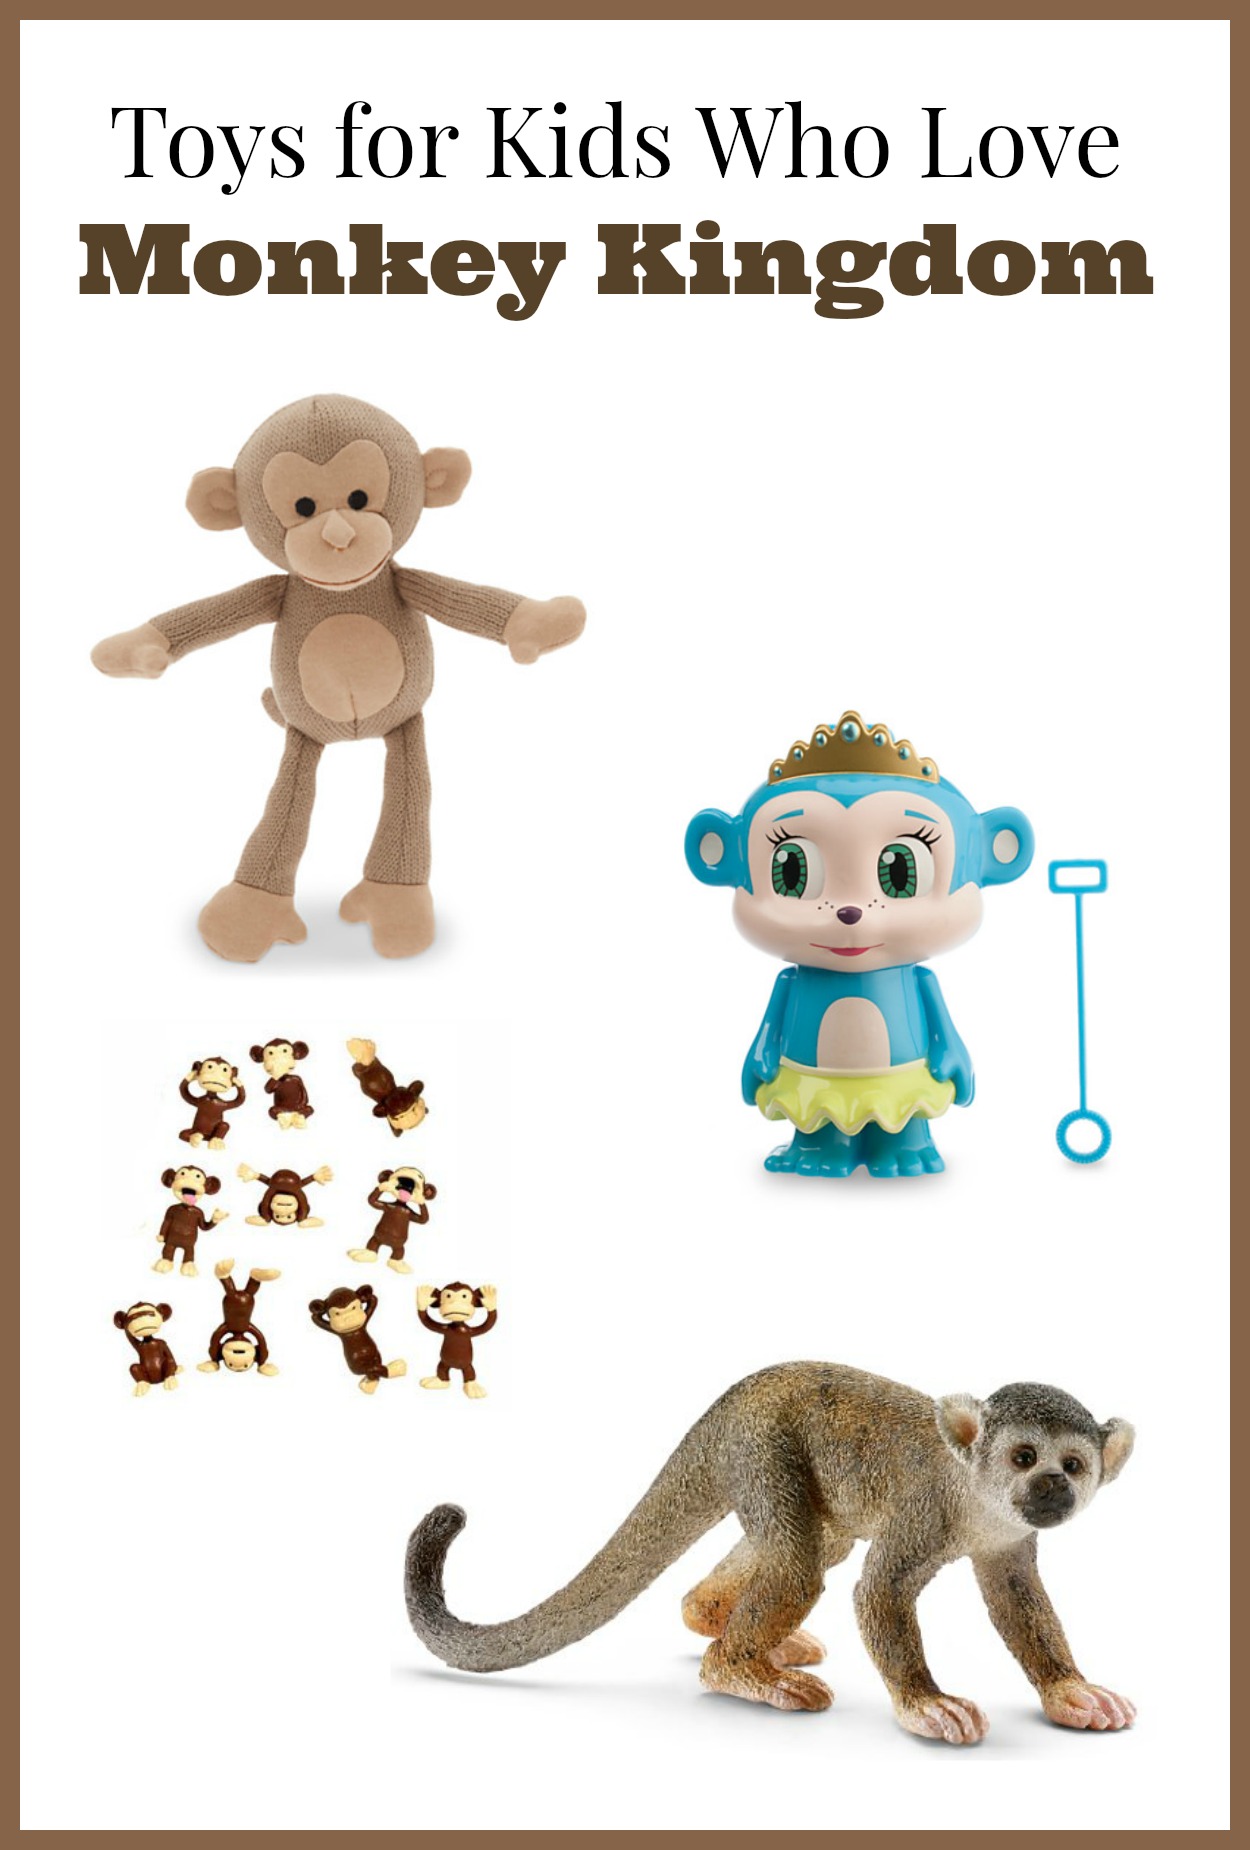 Looking for some great ideas for Monkey Kingdom toys? While there aren't a lot of official toys out, we'll give you tips on choosing toys your kids will love!